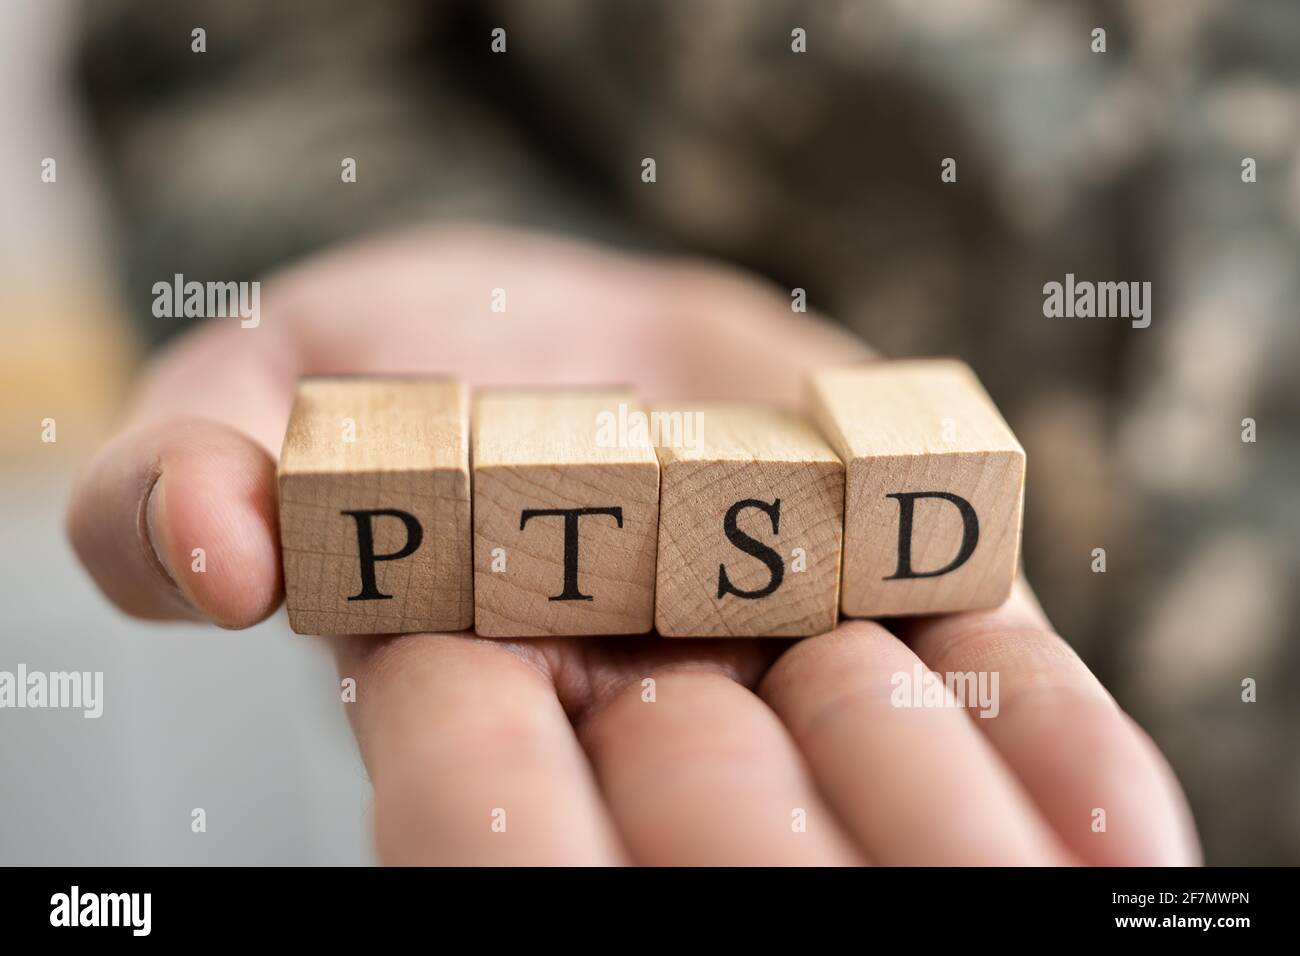 PTSD Military Army Soldier With Trauma And Stress Stock Photo